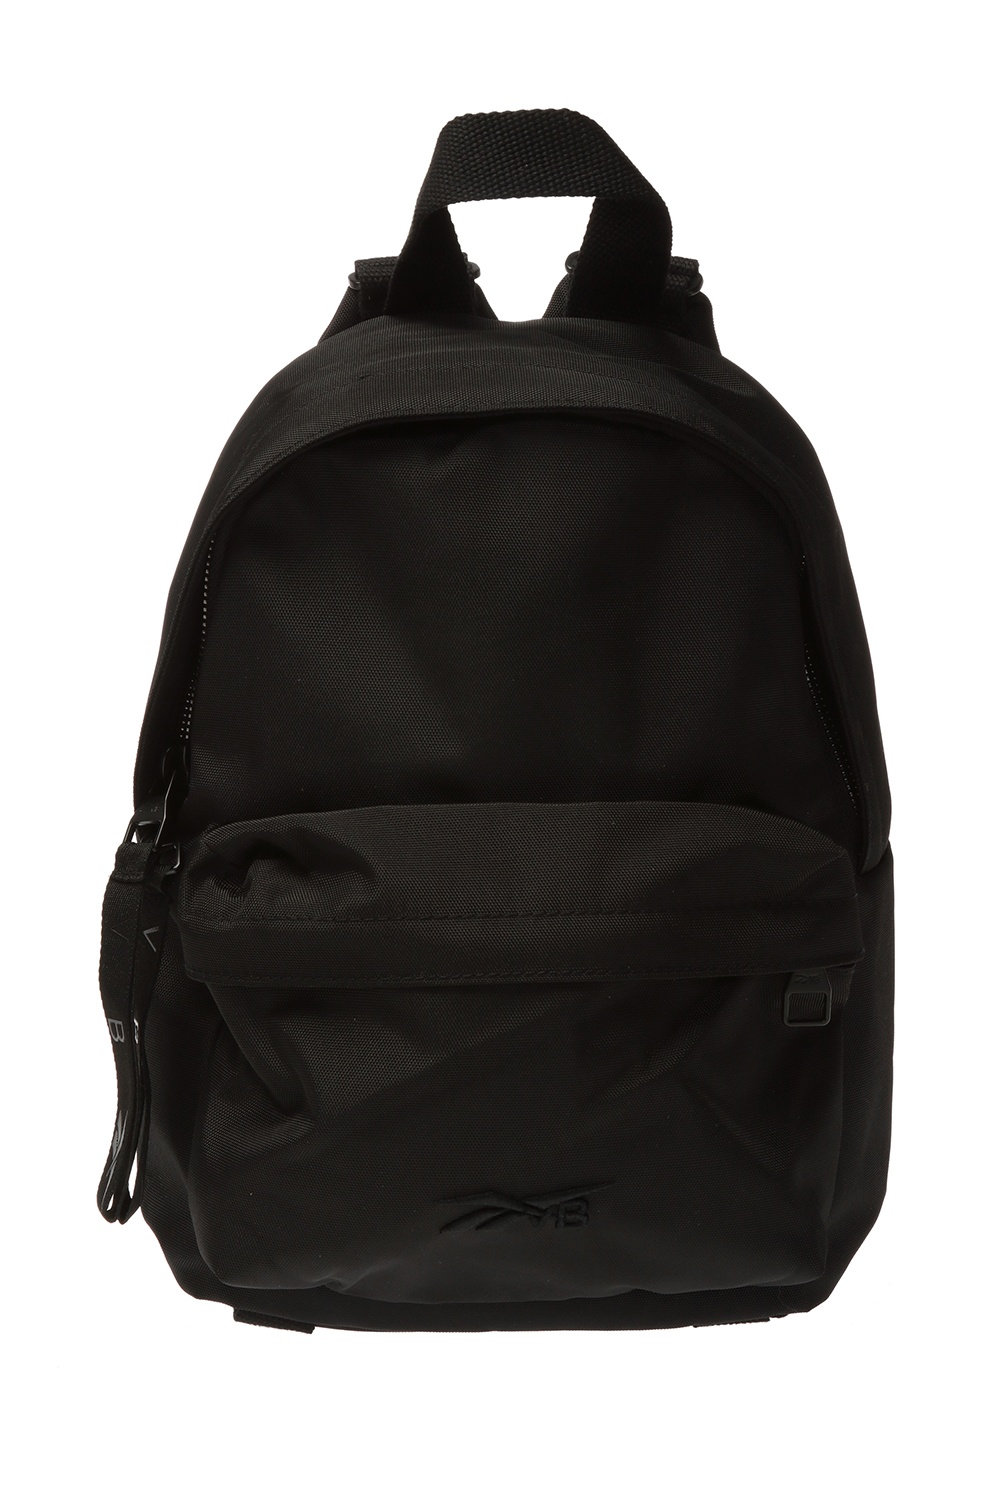 backpack online shopping singapore